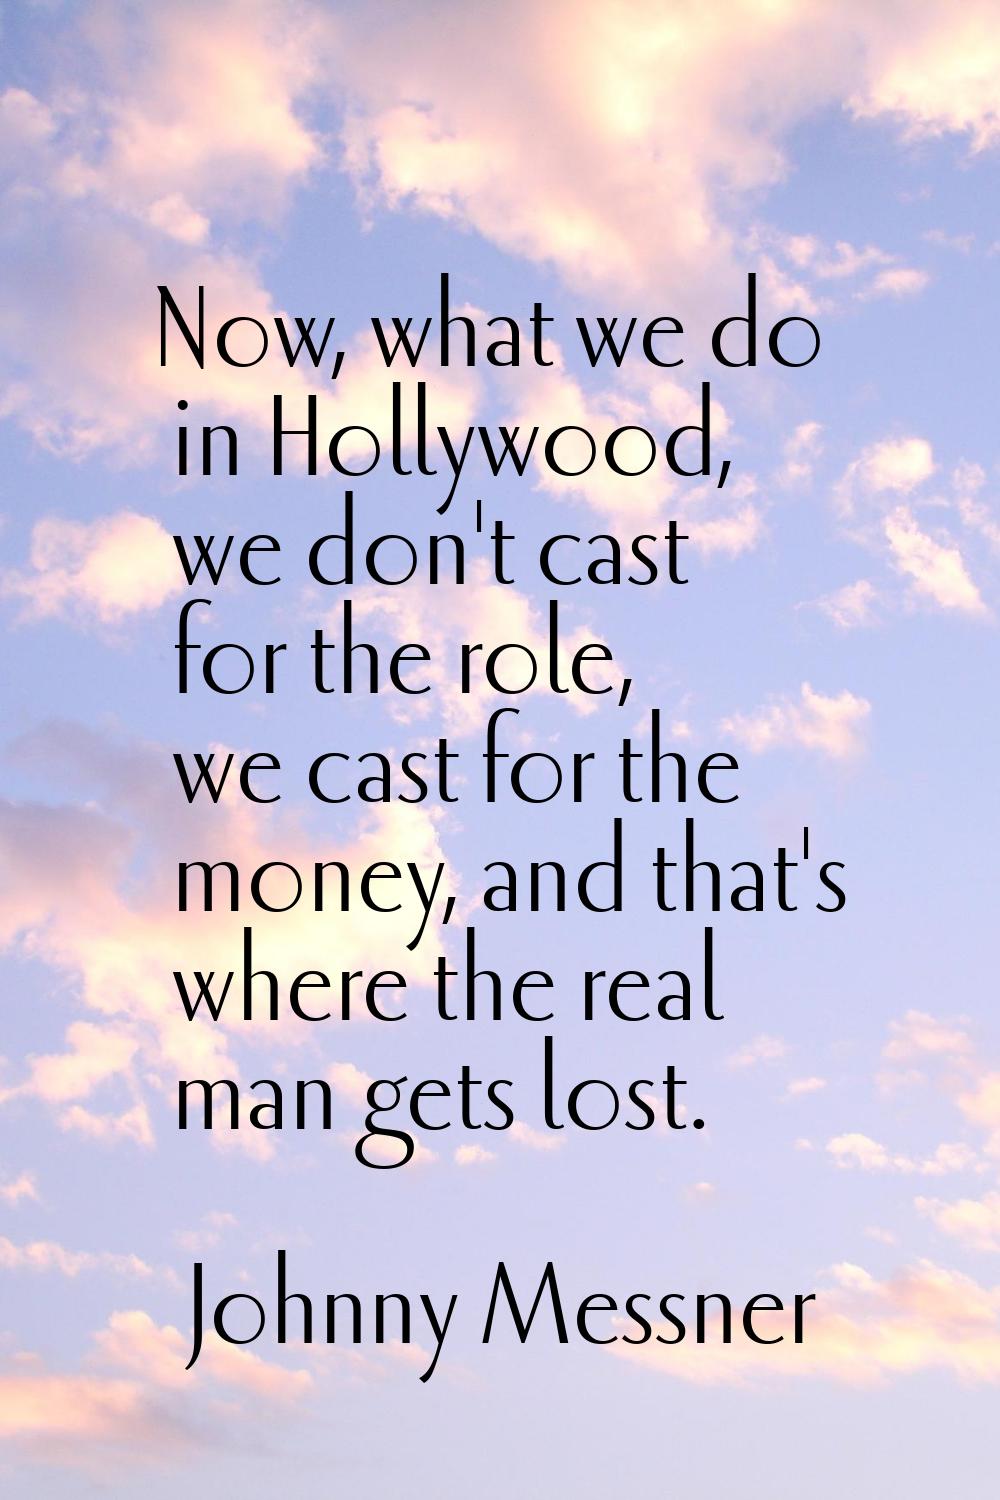 Now, what we do in Hollywood, we don't cast for the role, we cast for the money, and that's where t